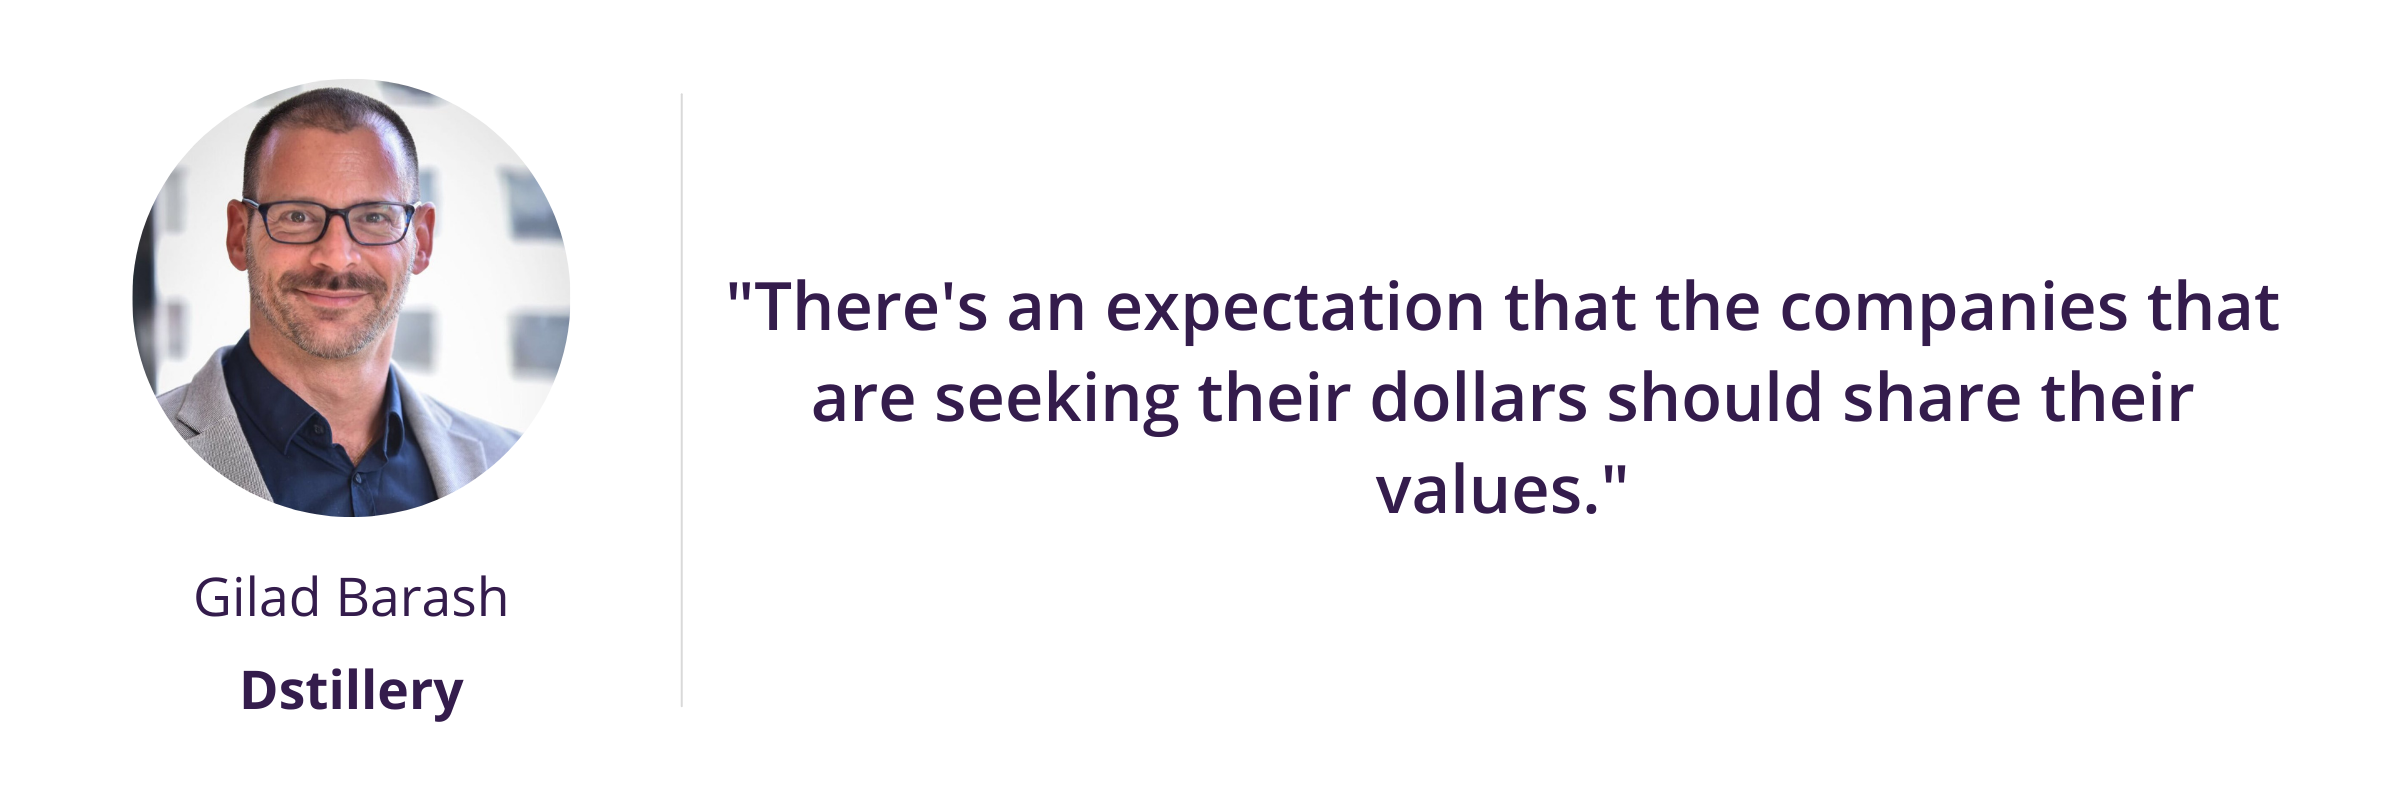 There's an expectation that the companies that are seeking their dollars should share their values.